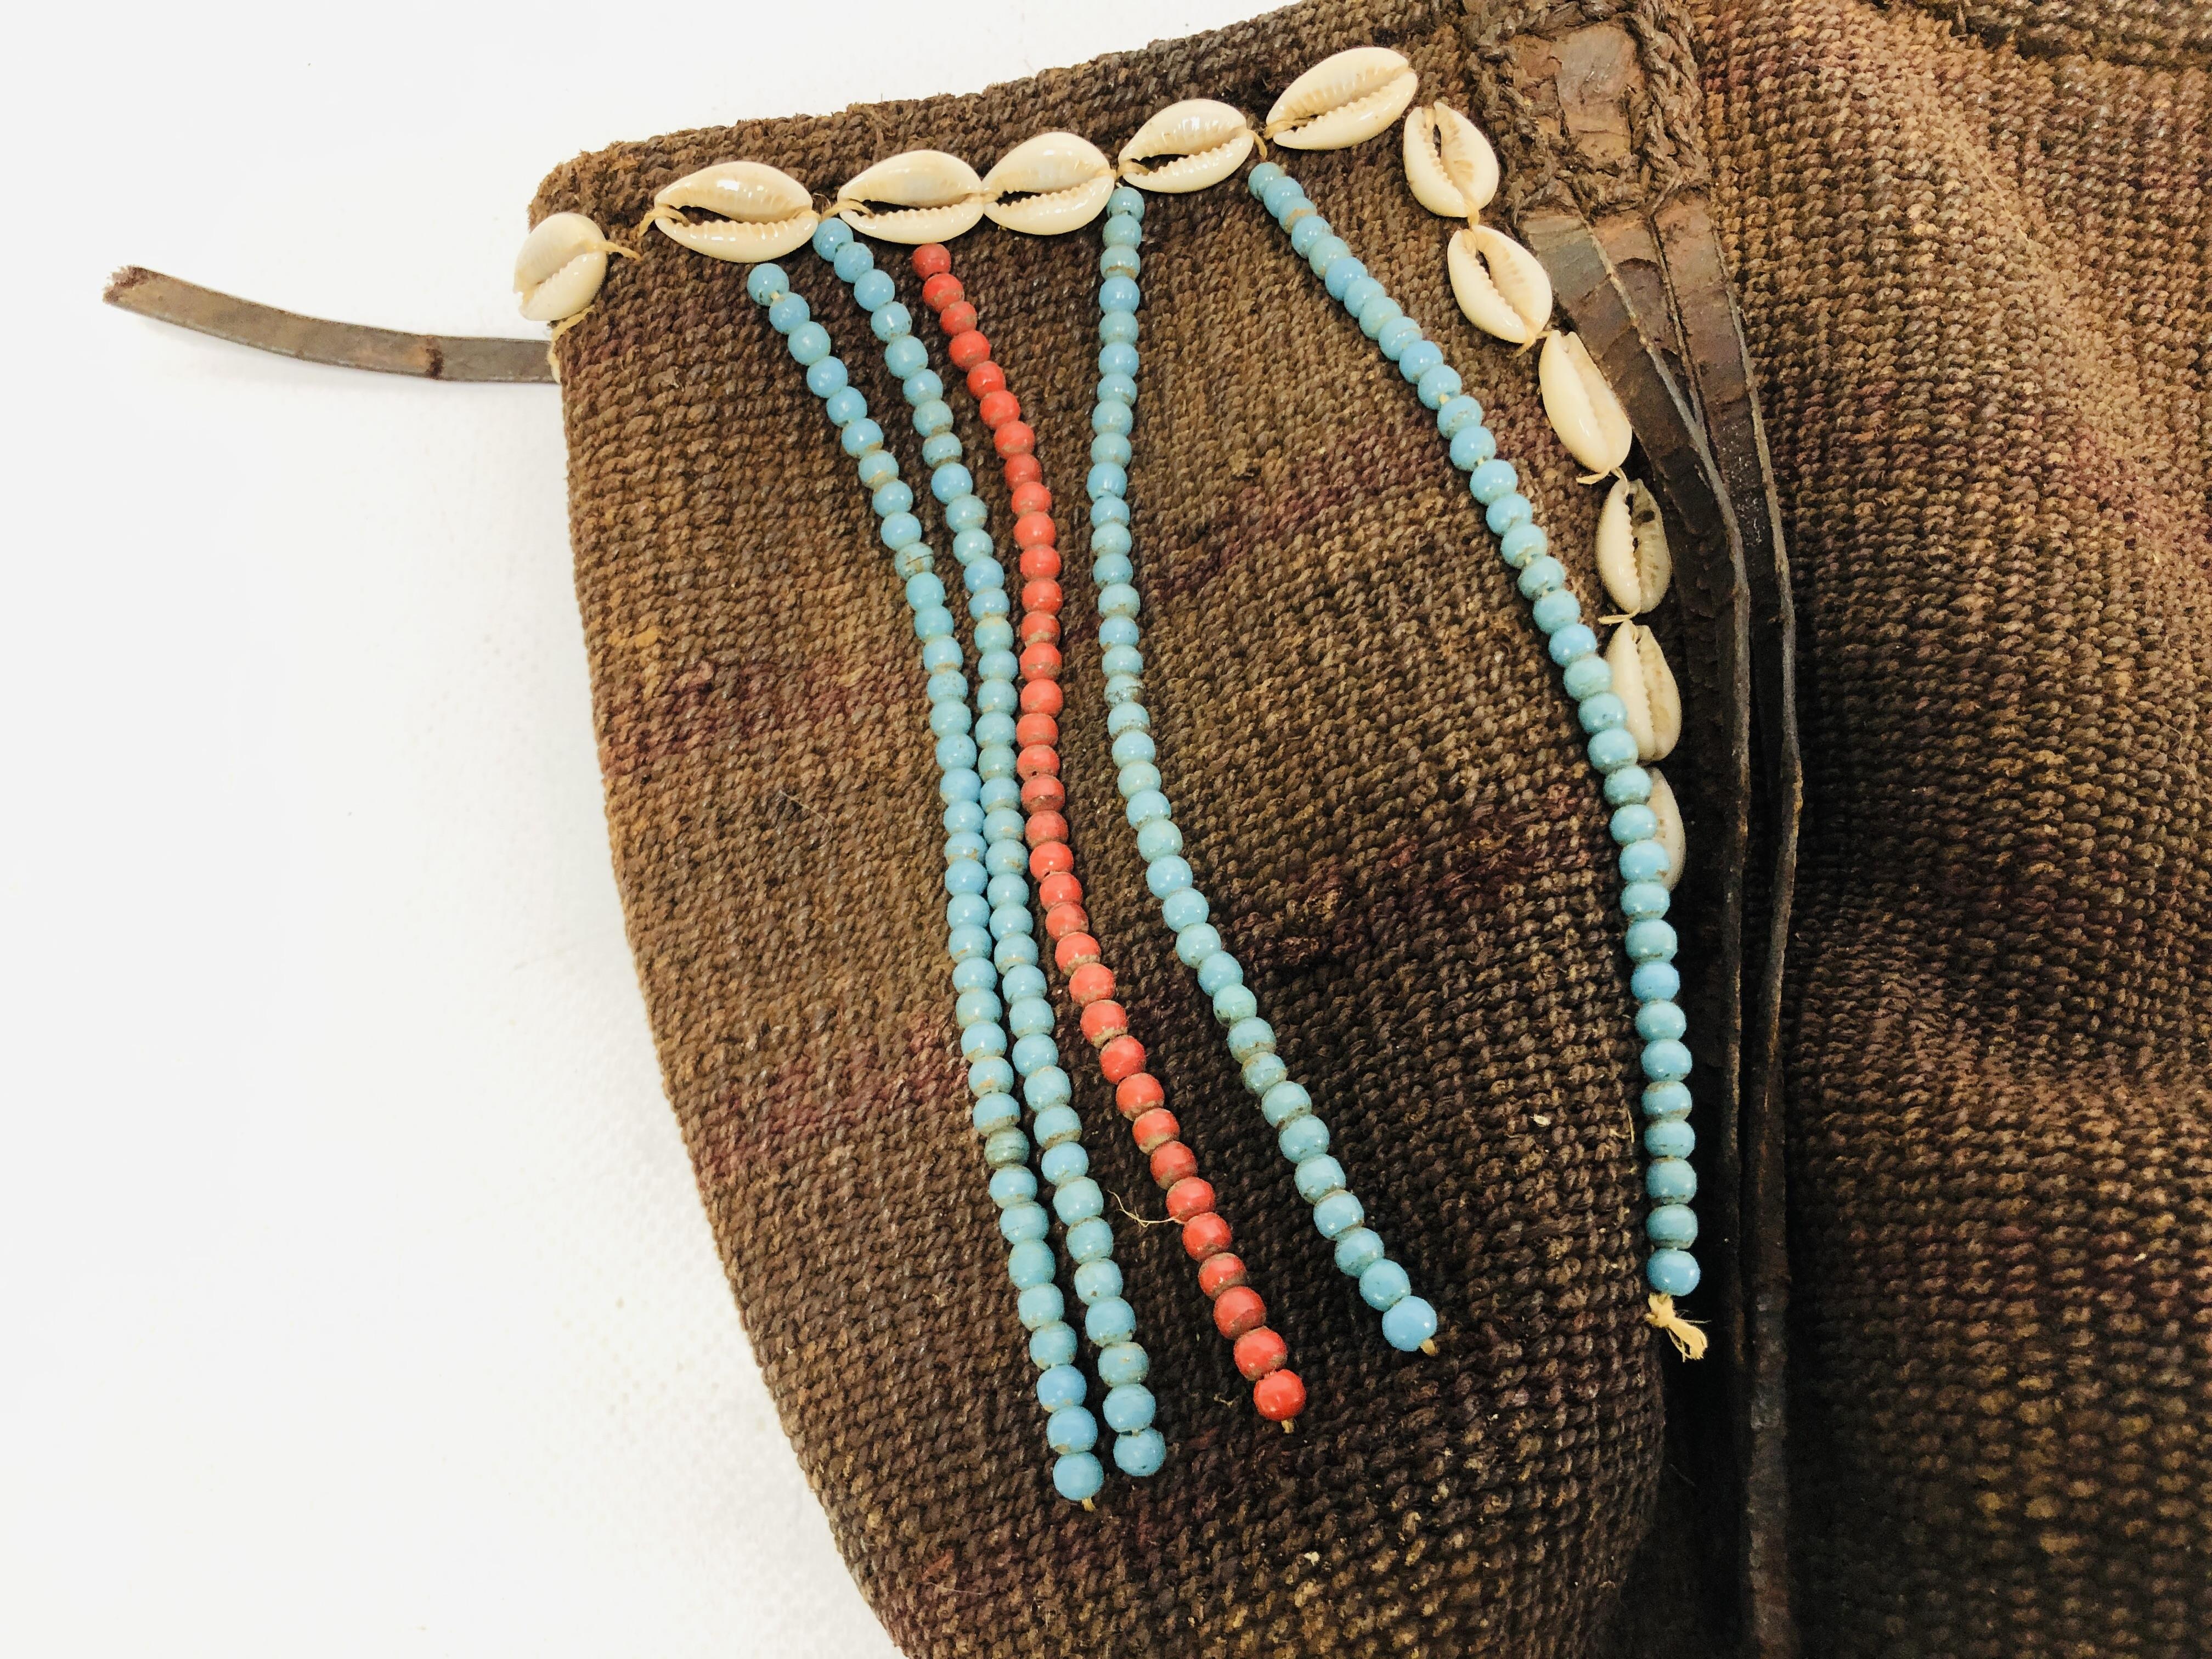 AN AFRICAN KIKUYU BAG APPLIED WITH COWRIE SHELLS AND BEADS - Image 4 of 8